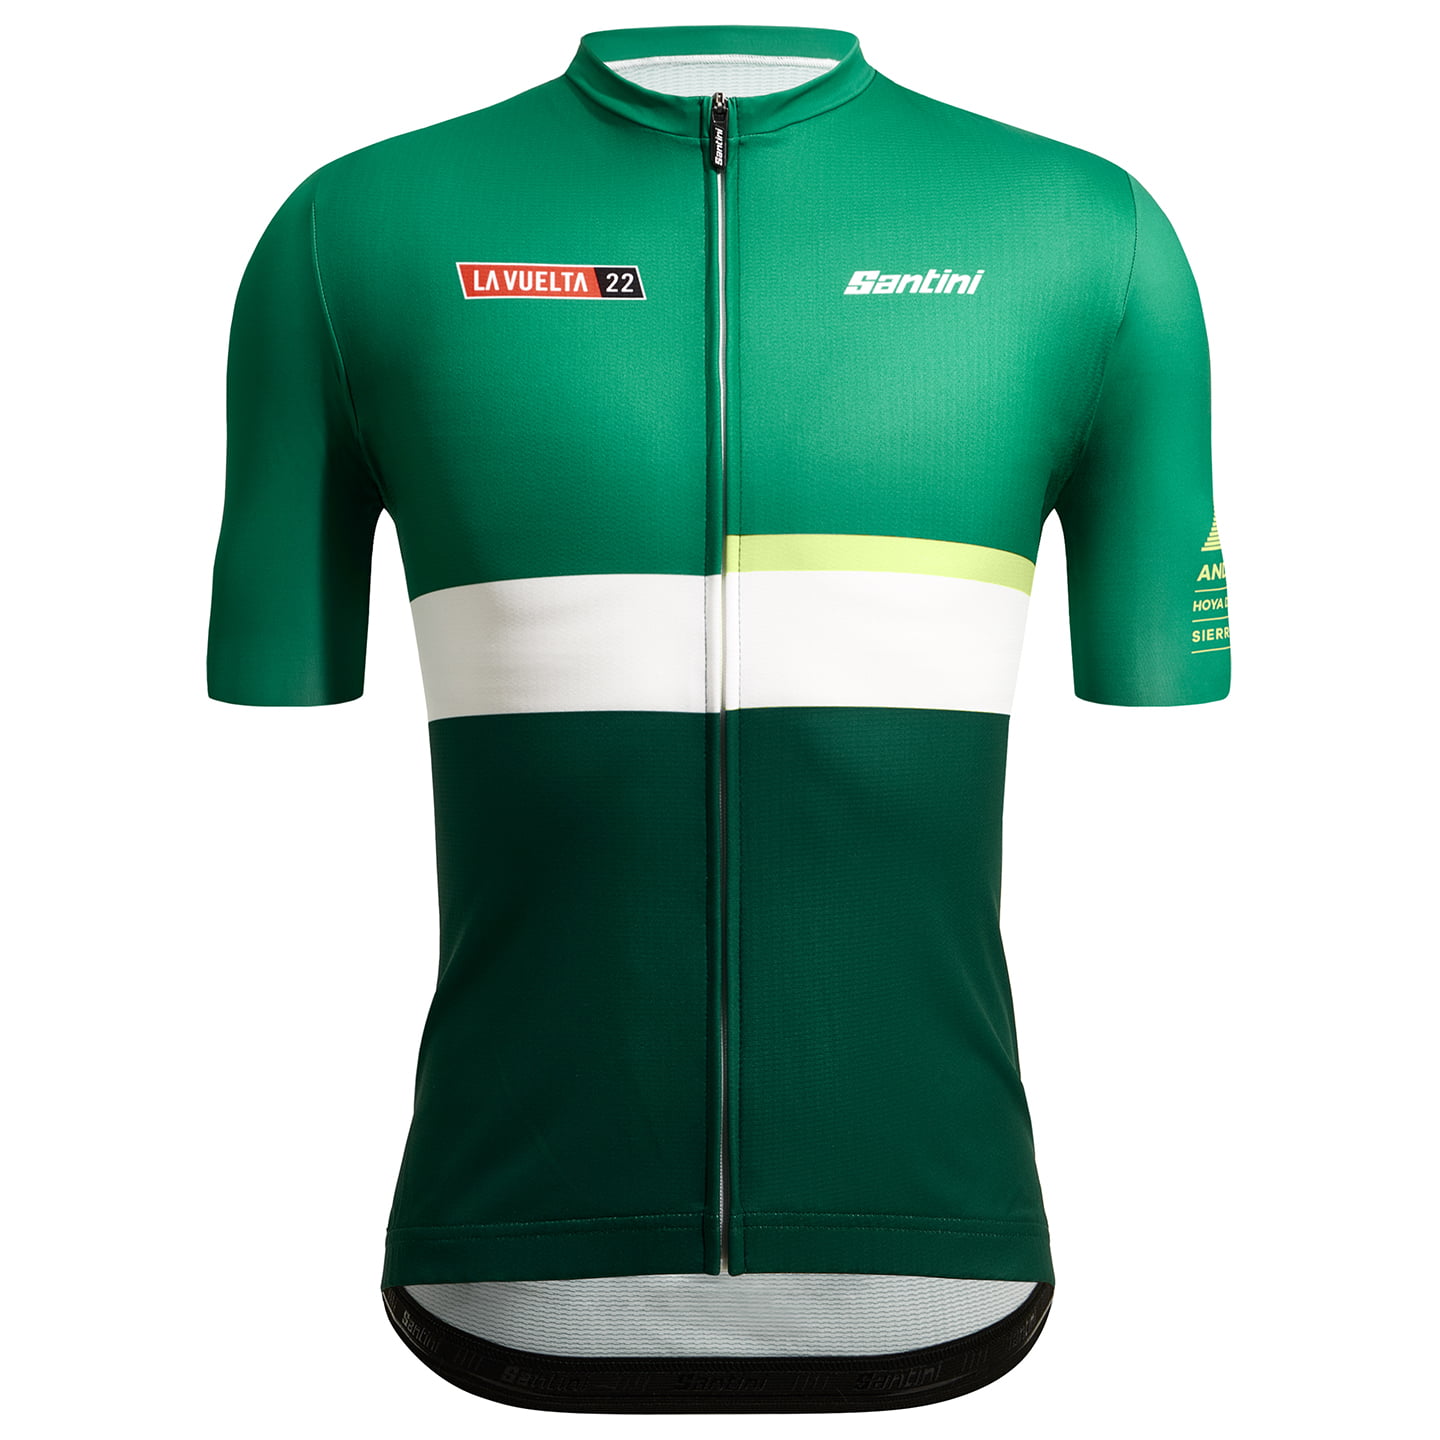 LA VUELTA Sierra Nevada 2022 Short Sleeve Jersey, for men, size M, Cycle jersey, Cycling clothing